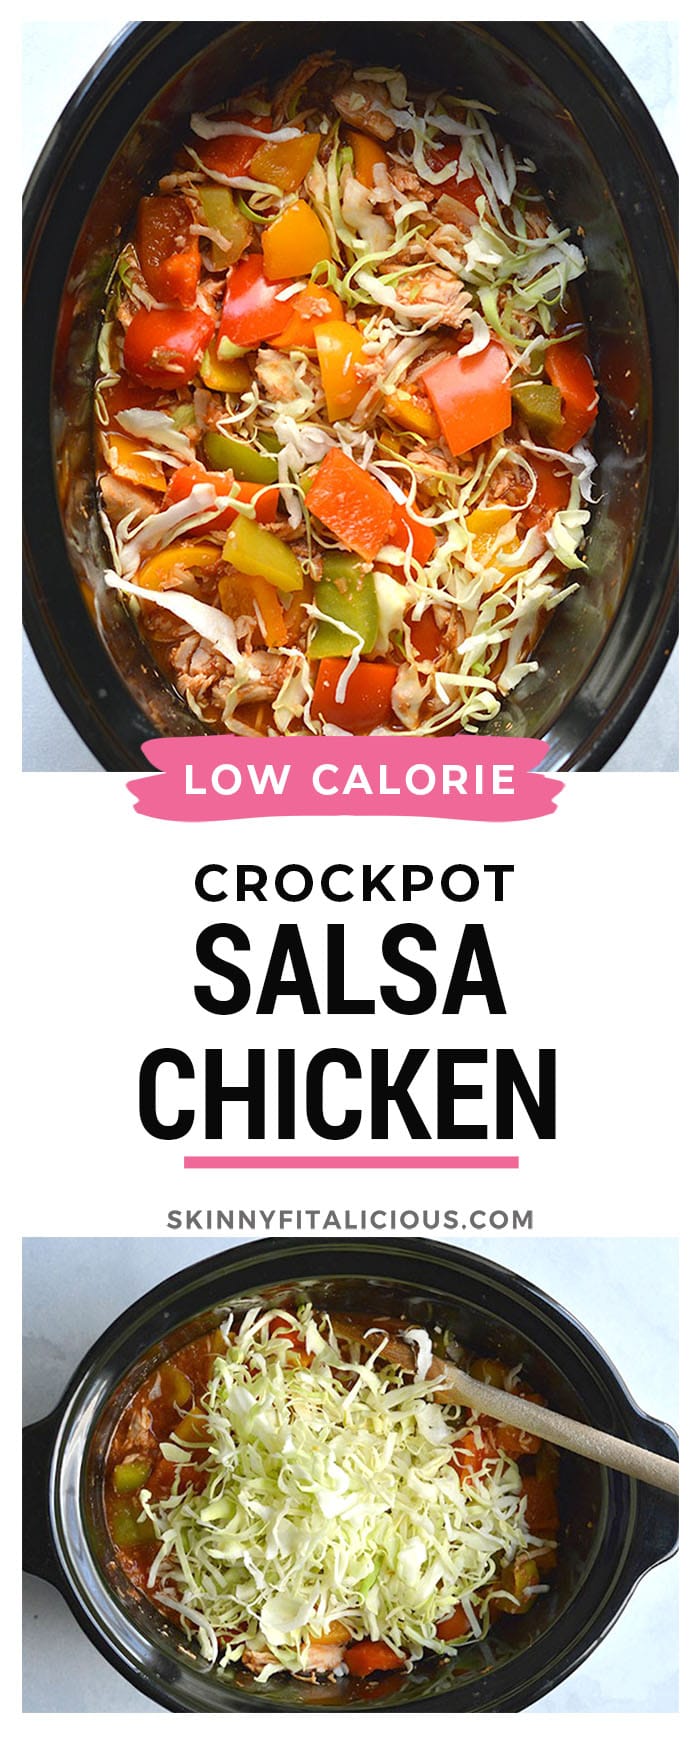 Easy Healthy Crockpot Salsa Chicken! The best shredded chicken recipe for a simple meal prep or low calorie wholesome dinners or lunches. Low Calorie + Gluten Free + Paleo + Low Carb